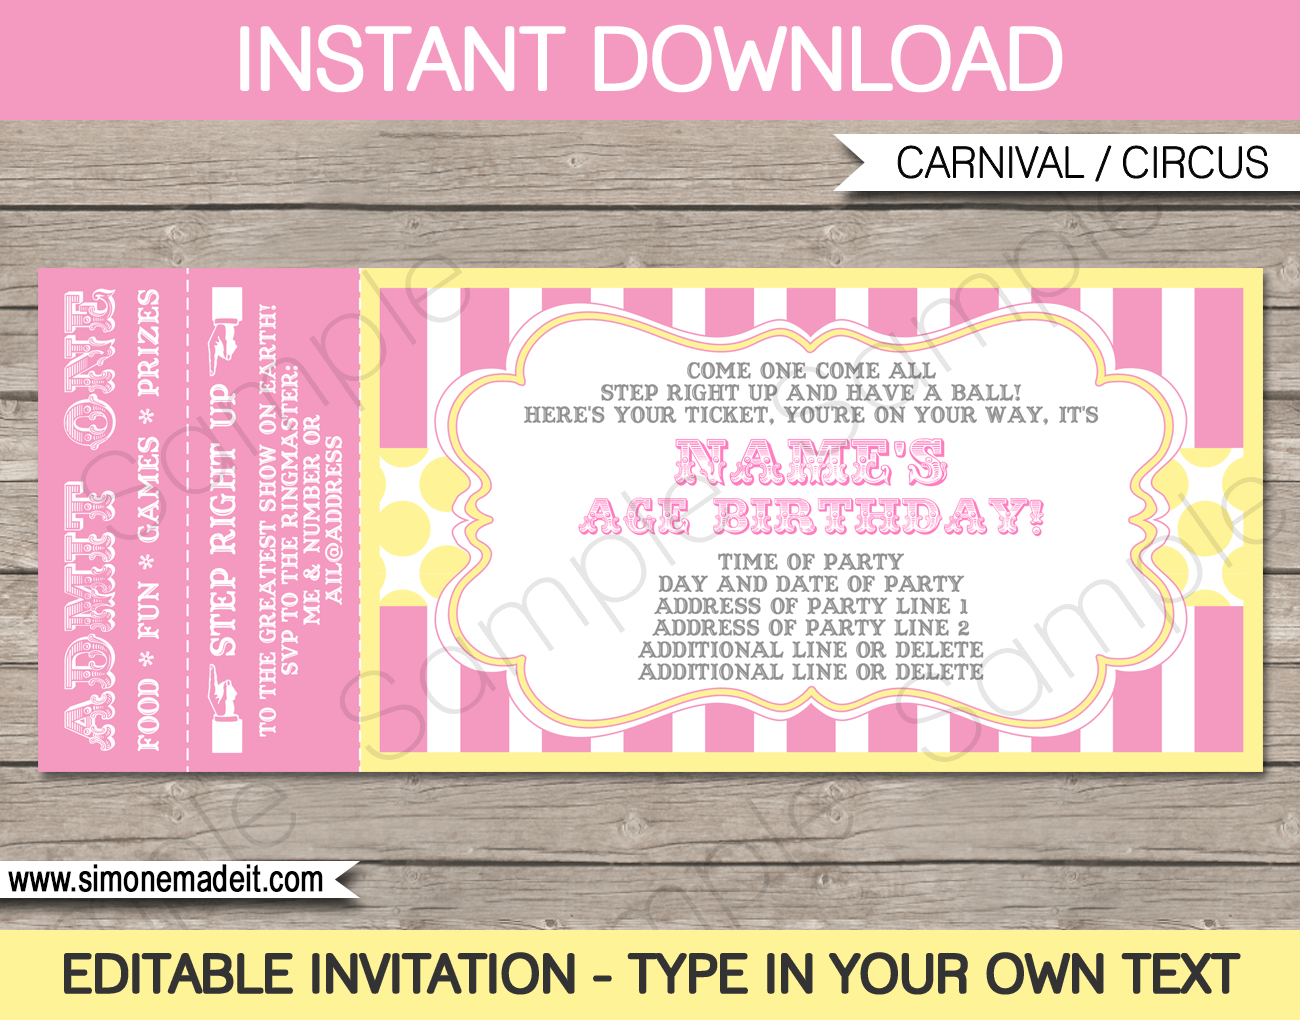 Carnival Birthday Ticket Invitations Template Carnival Circus inside dimensions 1300 X 1020